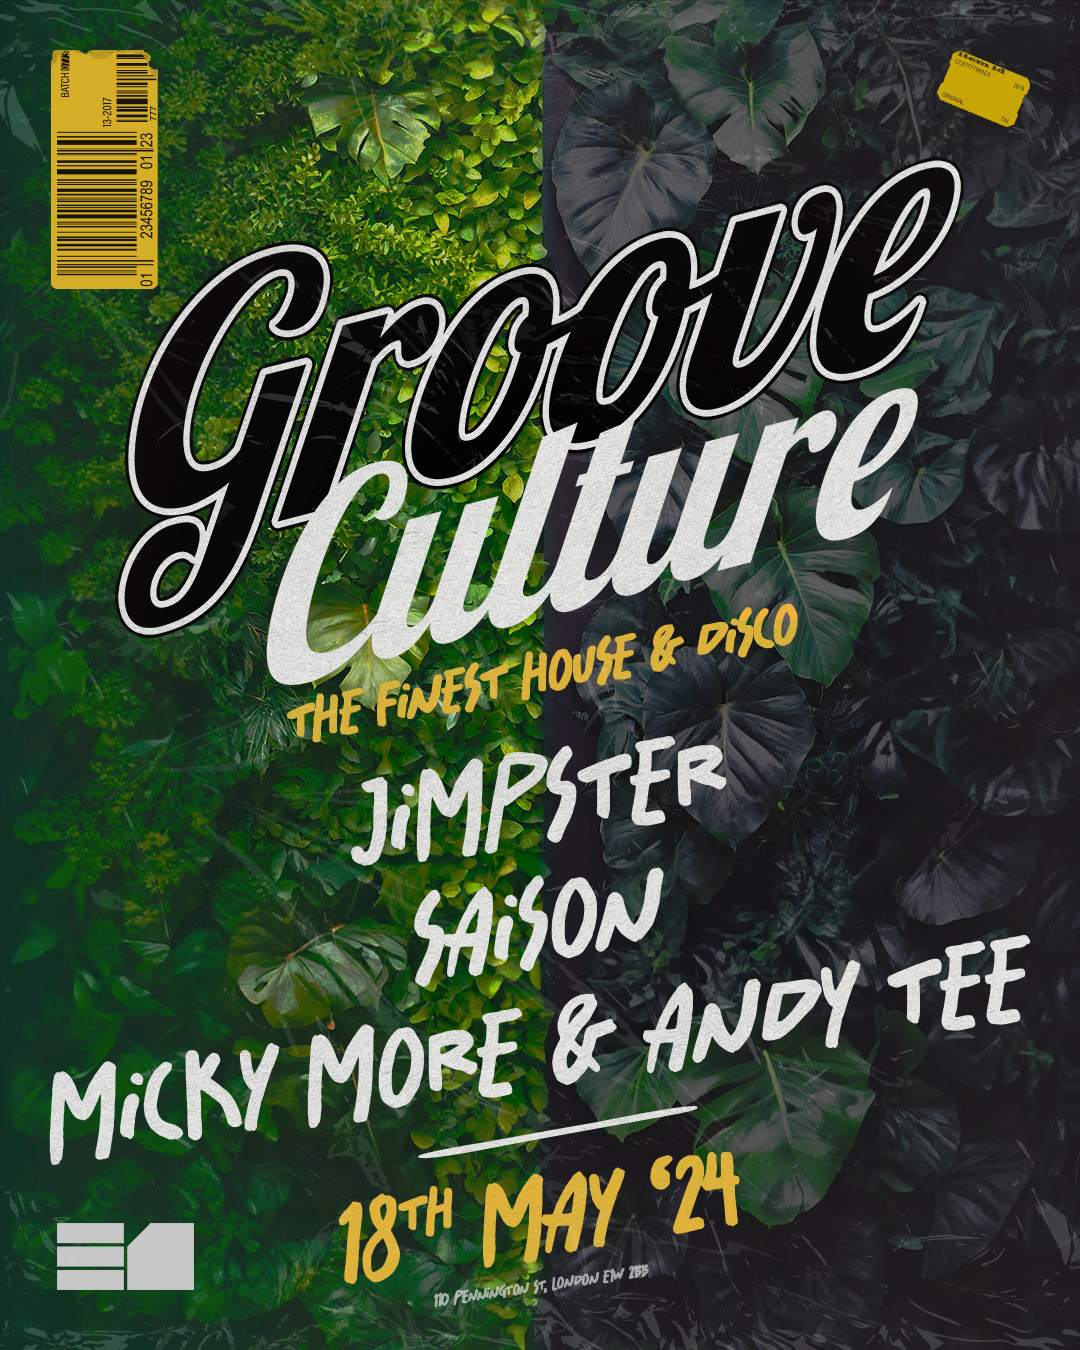 Groove Culture: Jimpster, Saison, Micky More & Andy Tee - フライヤー裏